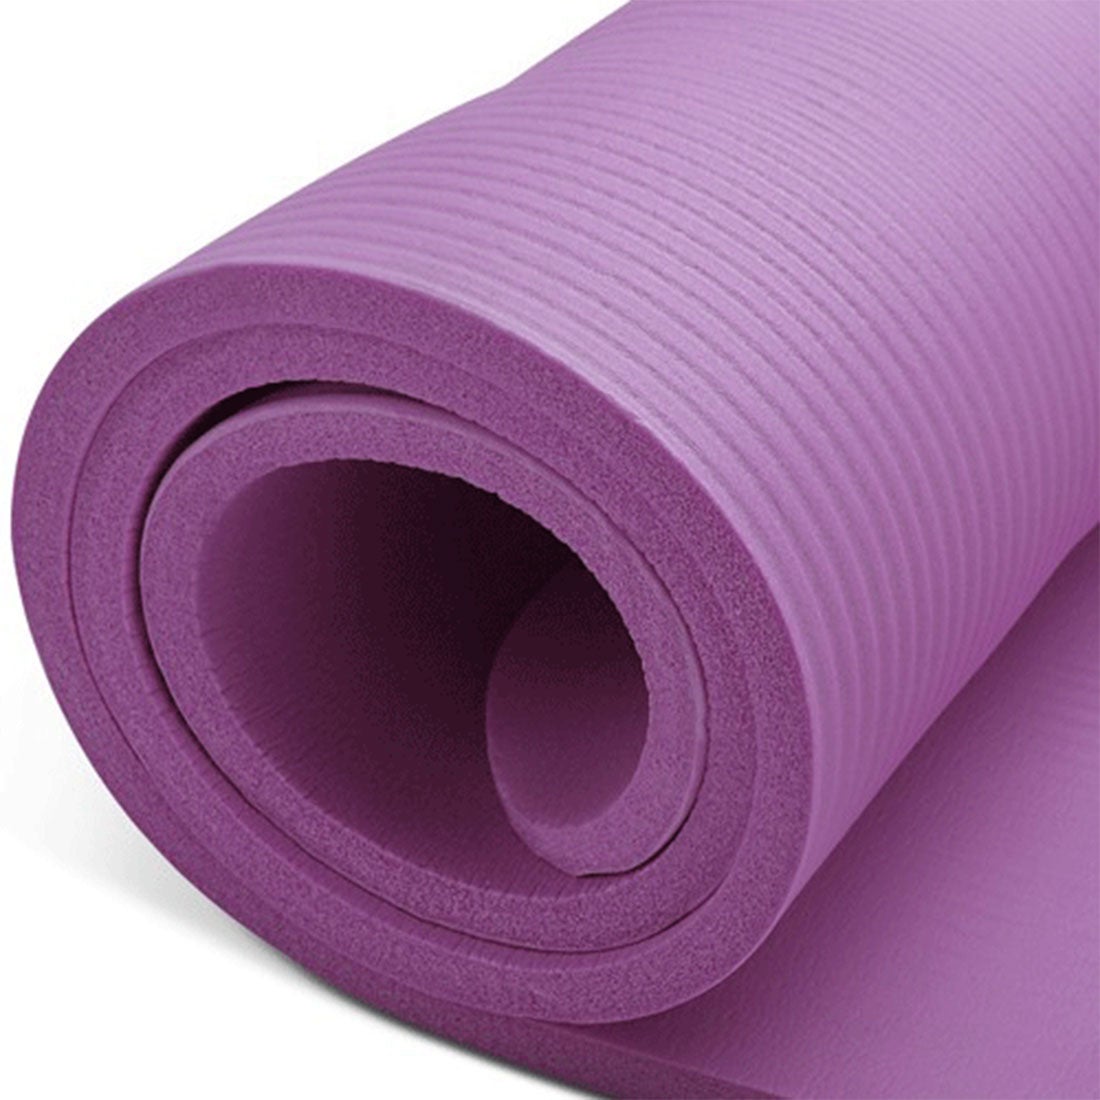 Extra Thick Yoga Mats Sale  International Society of Precision Agriculture